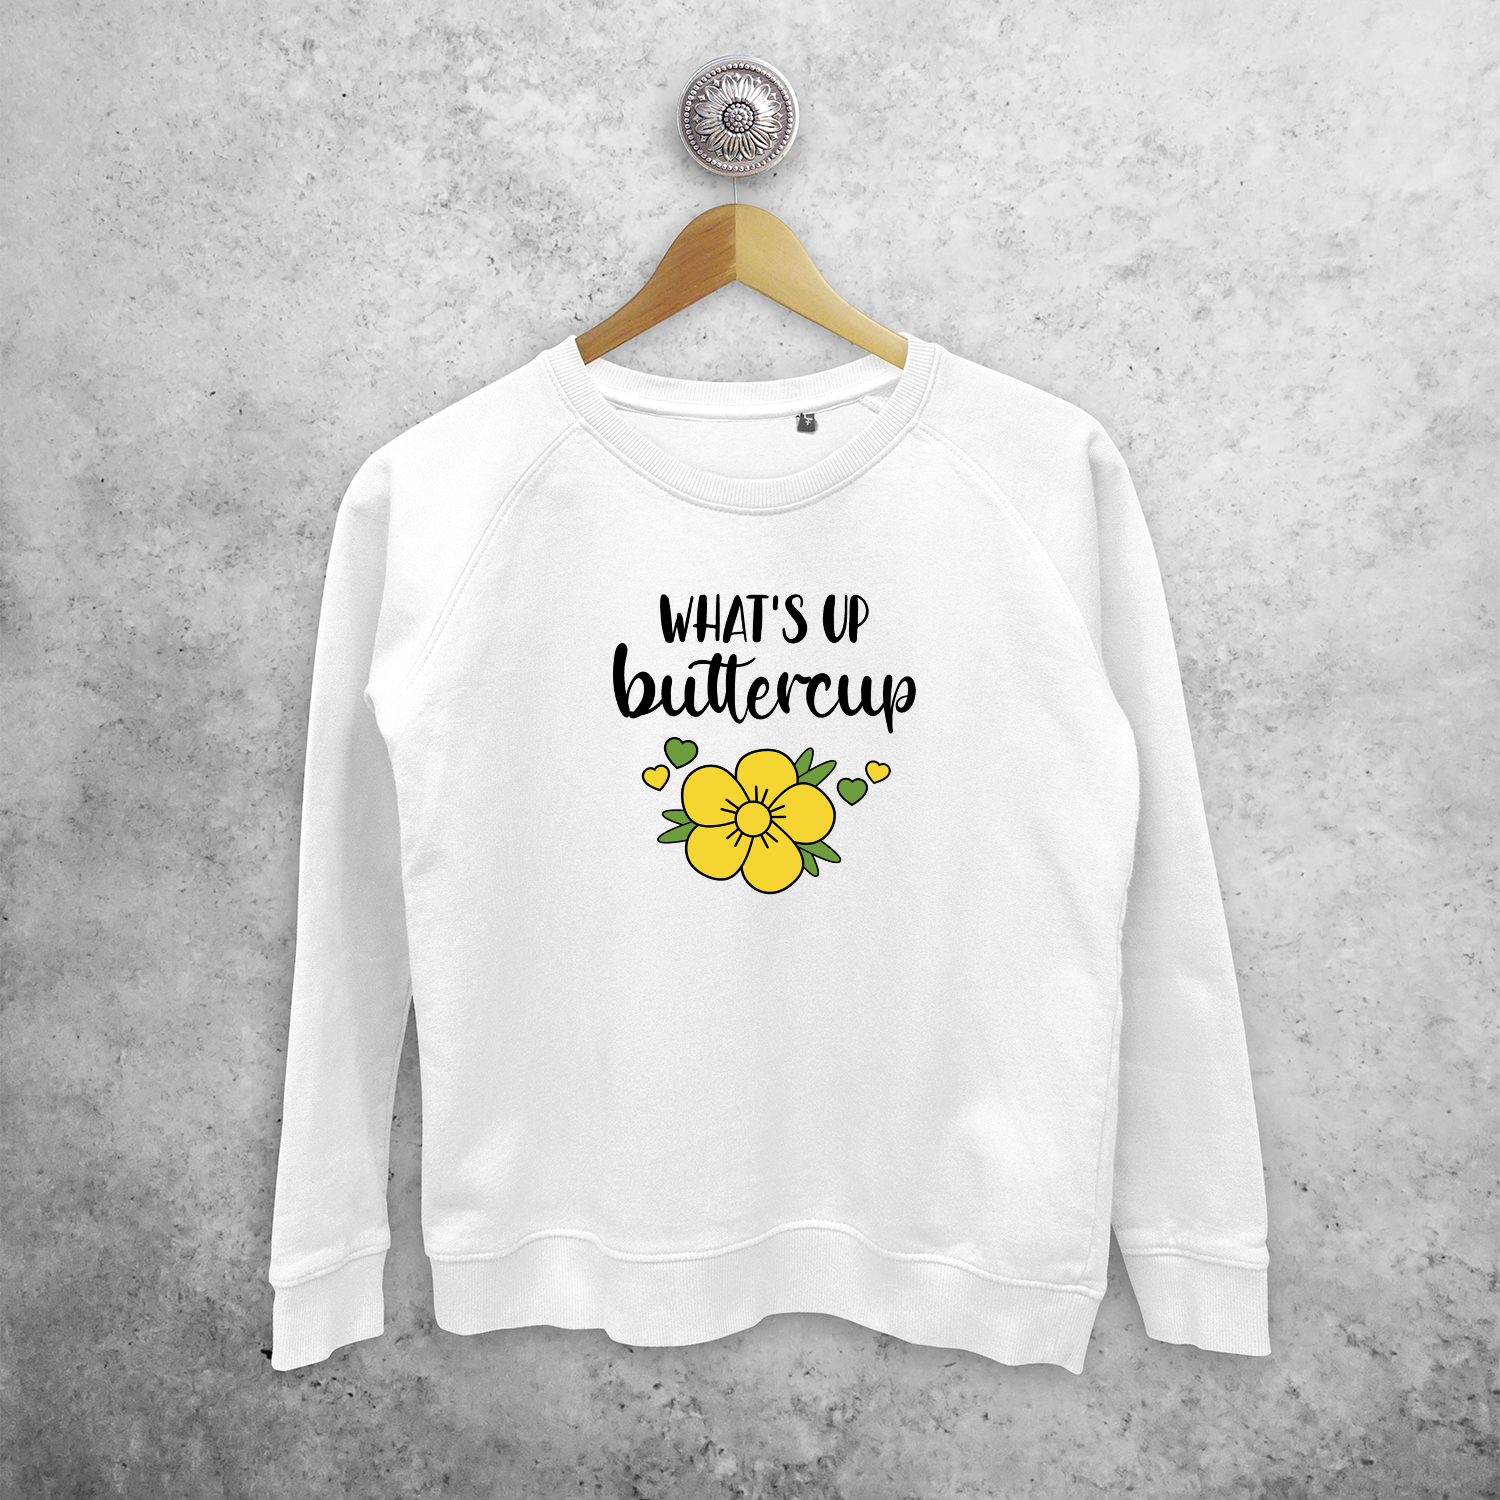 'What's up buttercup' sweater